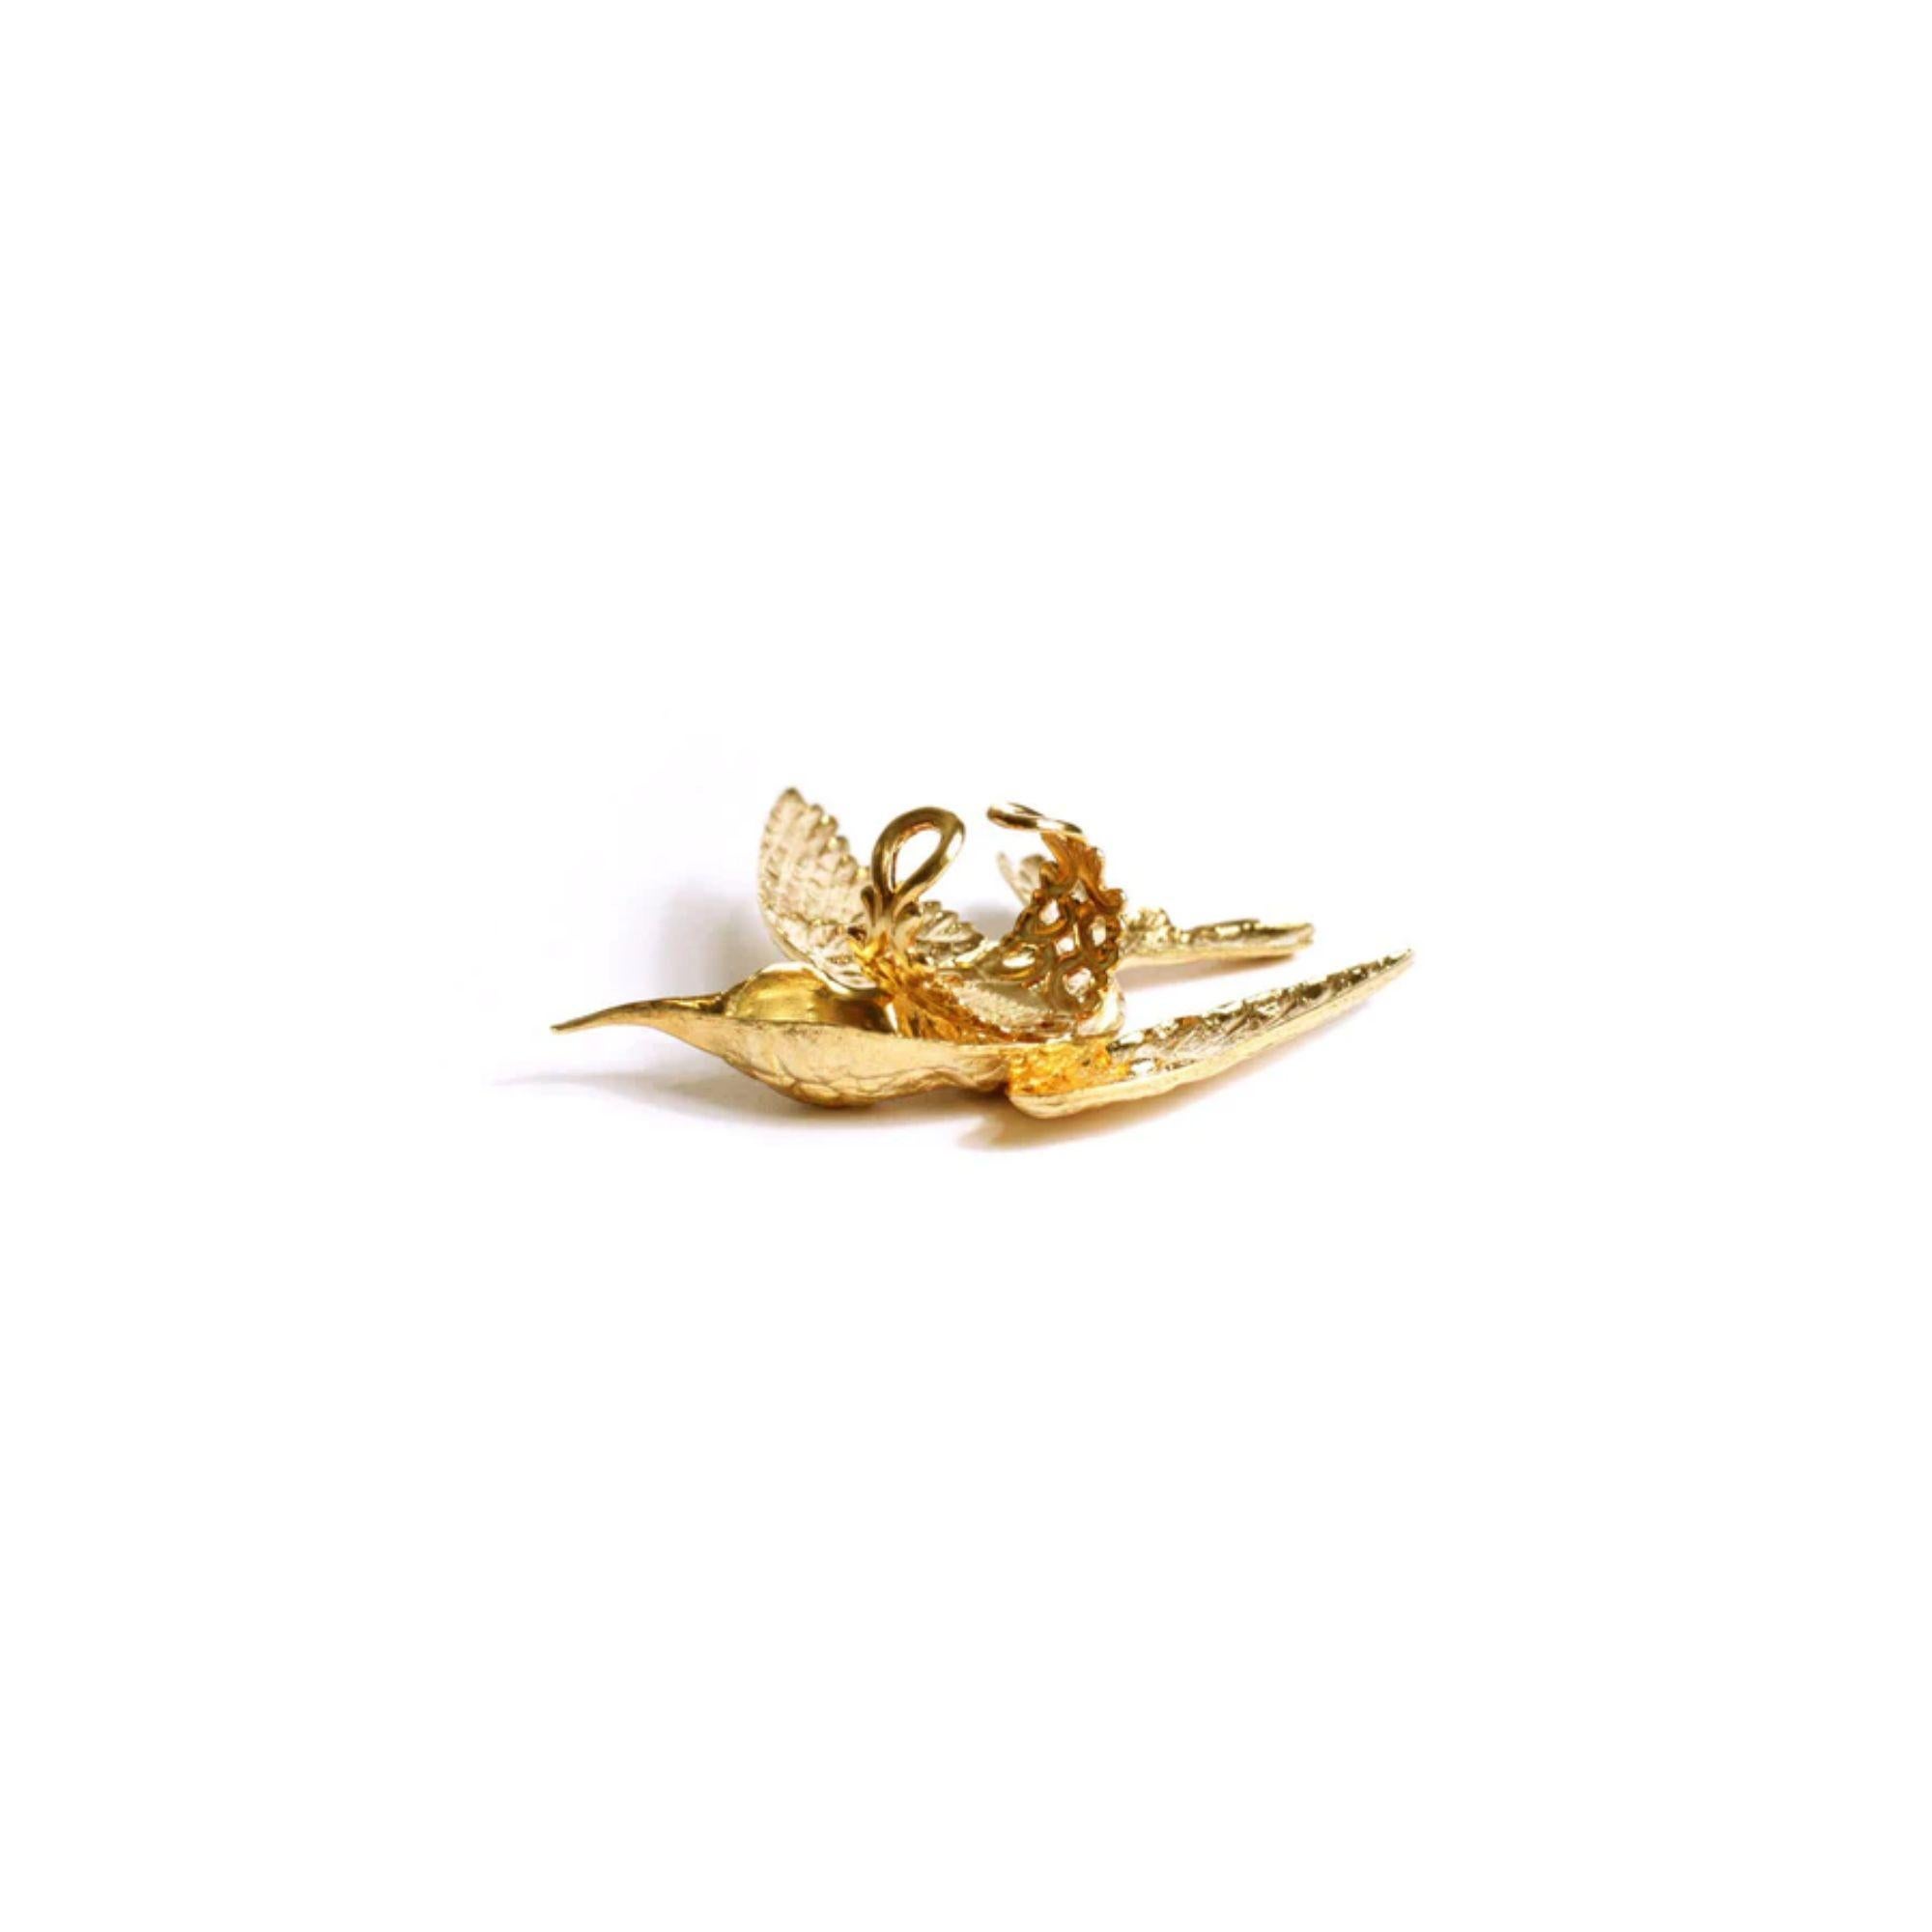 Stunning hummingbird ring with moving wing! It’s a unique cocktail size ring to capture everyone’s attention and lift your spirits. Made in America. 24k gold plated on Brass

The hummingbird generally symbolizes joy and playfulness, as well as